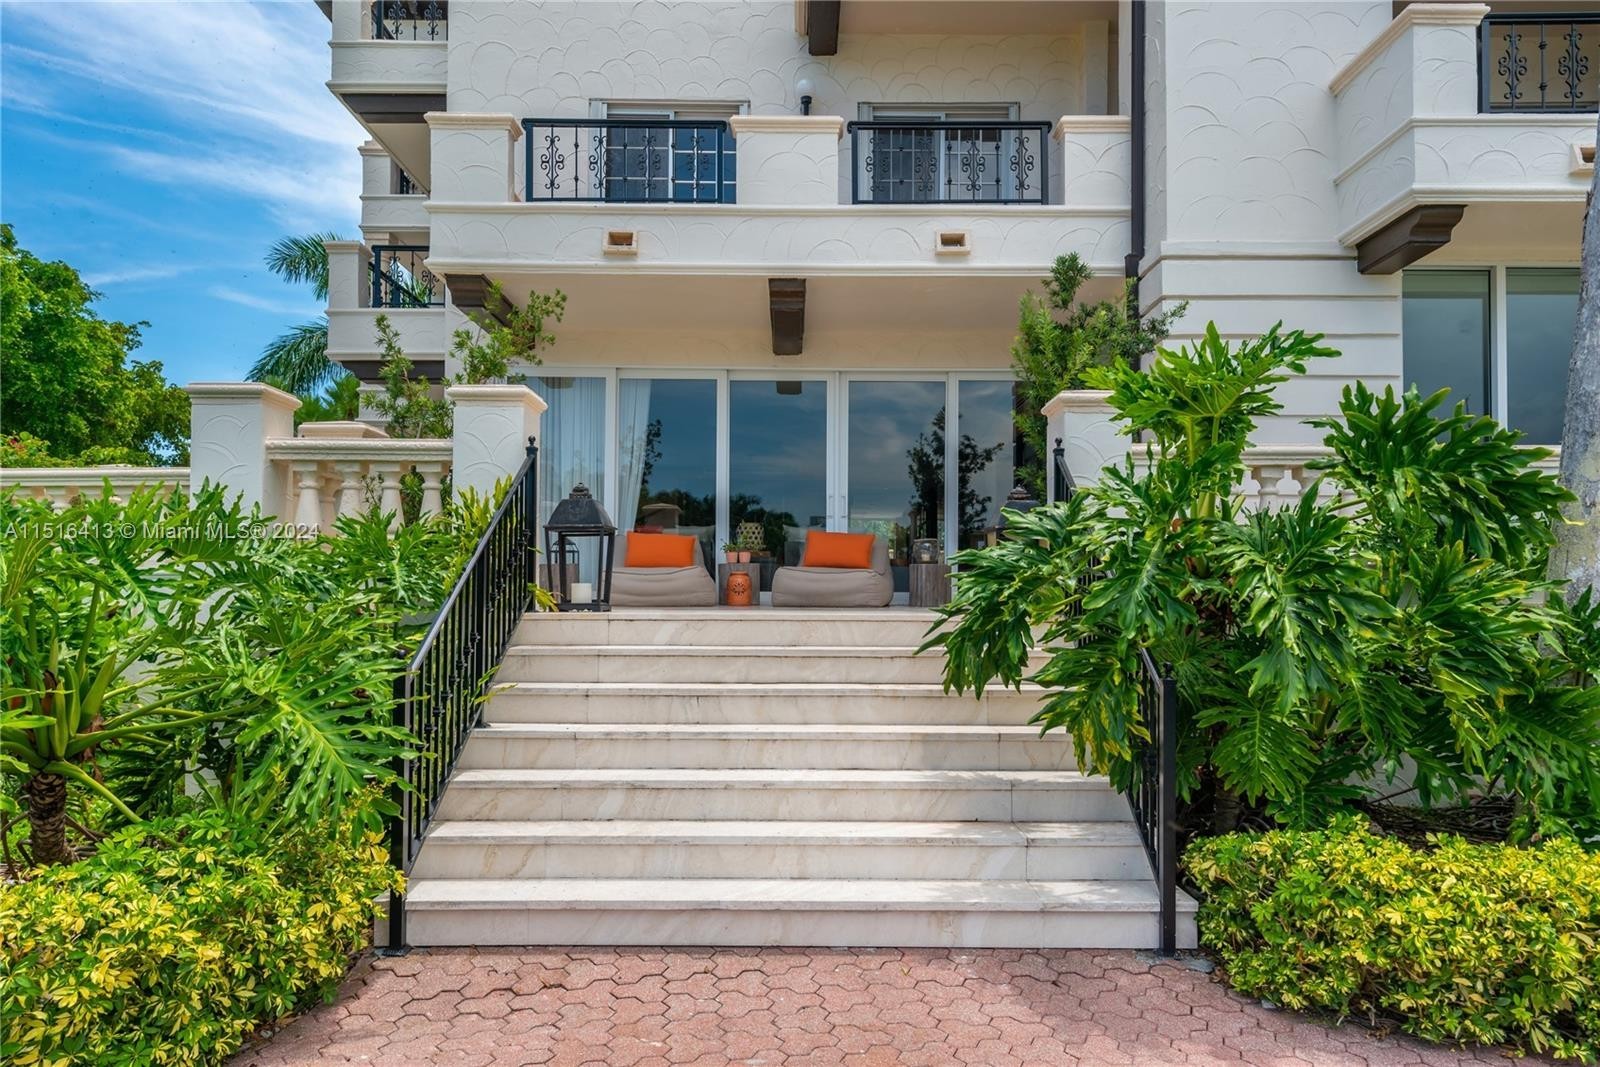 40. 2514 Fisher Island Dr